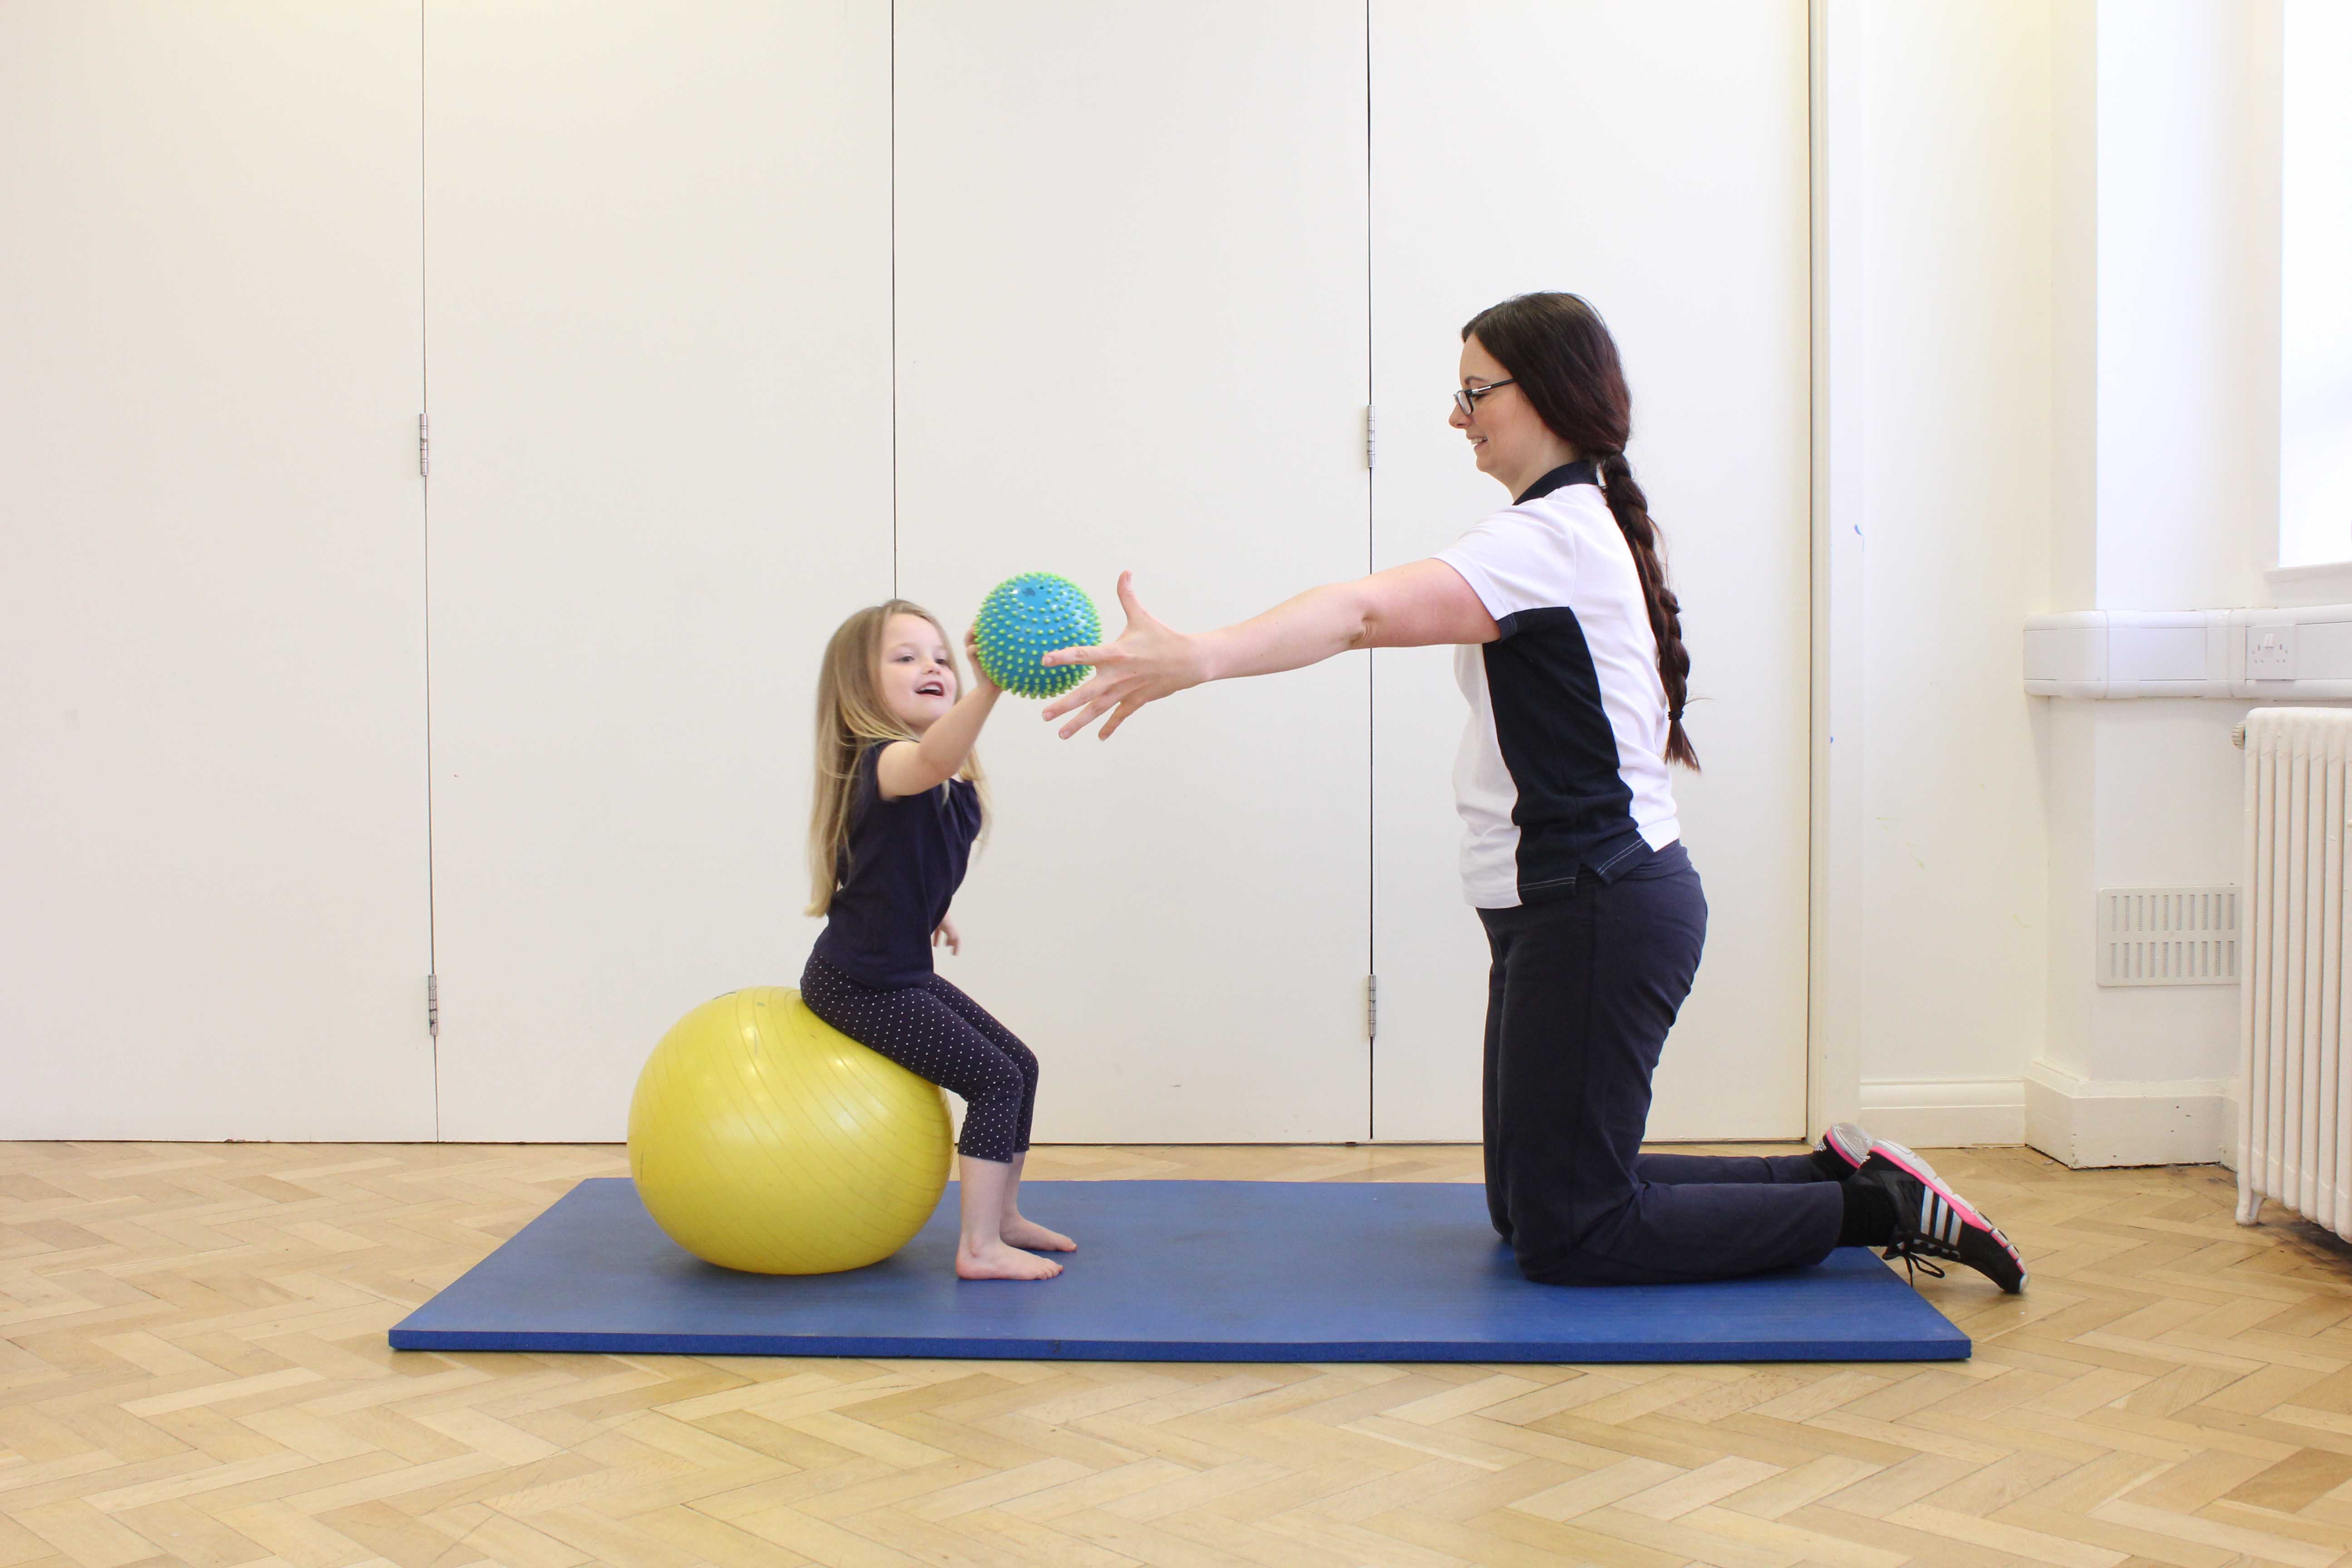 Progressive strengthening and balance exercises to develop functional mobility, led by a paediatric physiotherapist